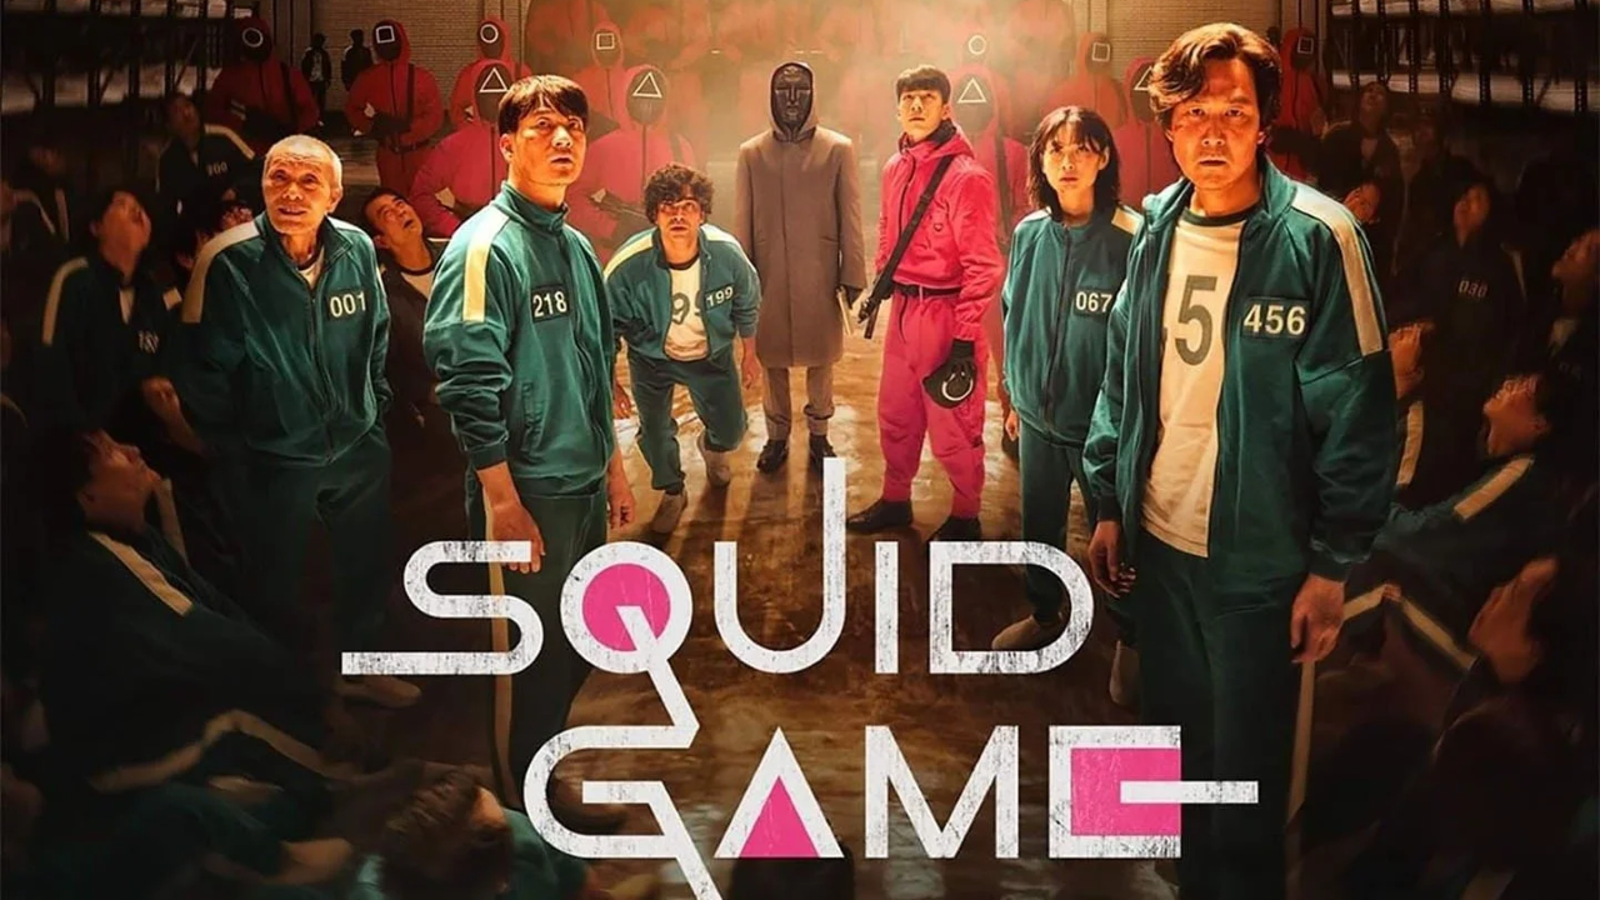 Review] 'Squid Game' is a compelling thriller with great